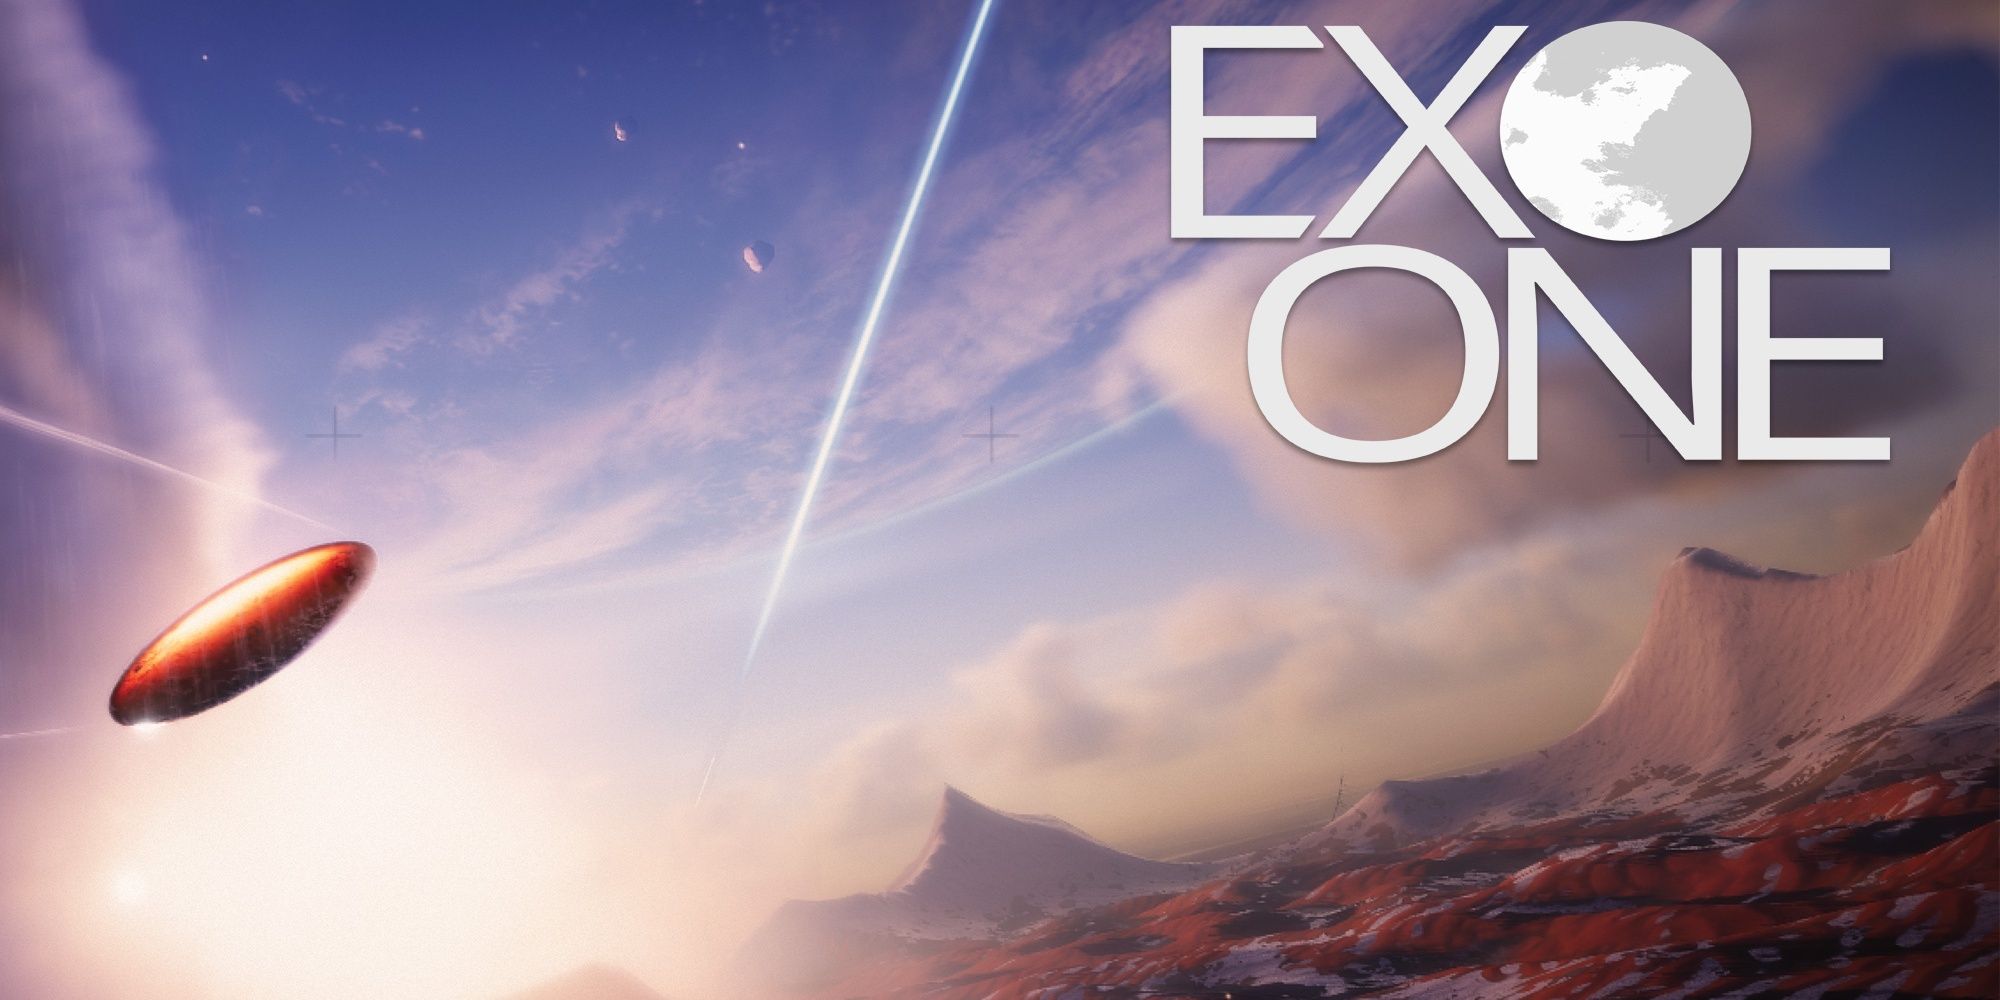 Exo One title Game Image With Space Vessel